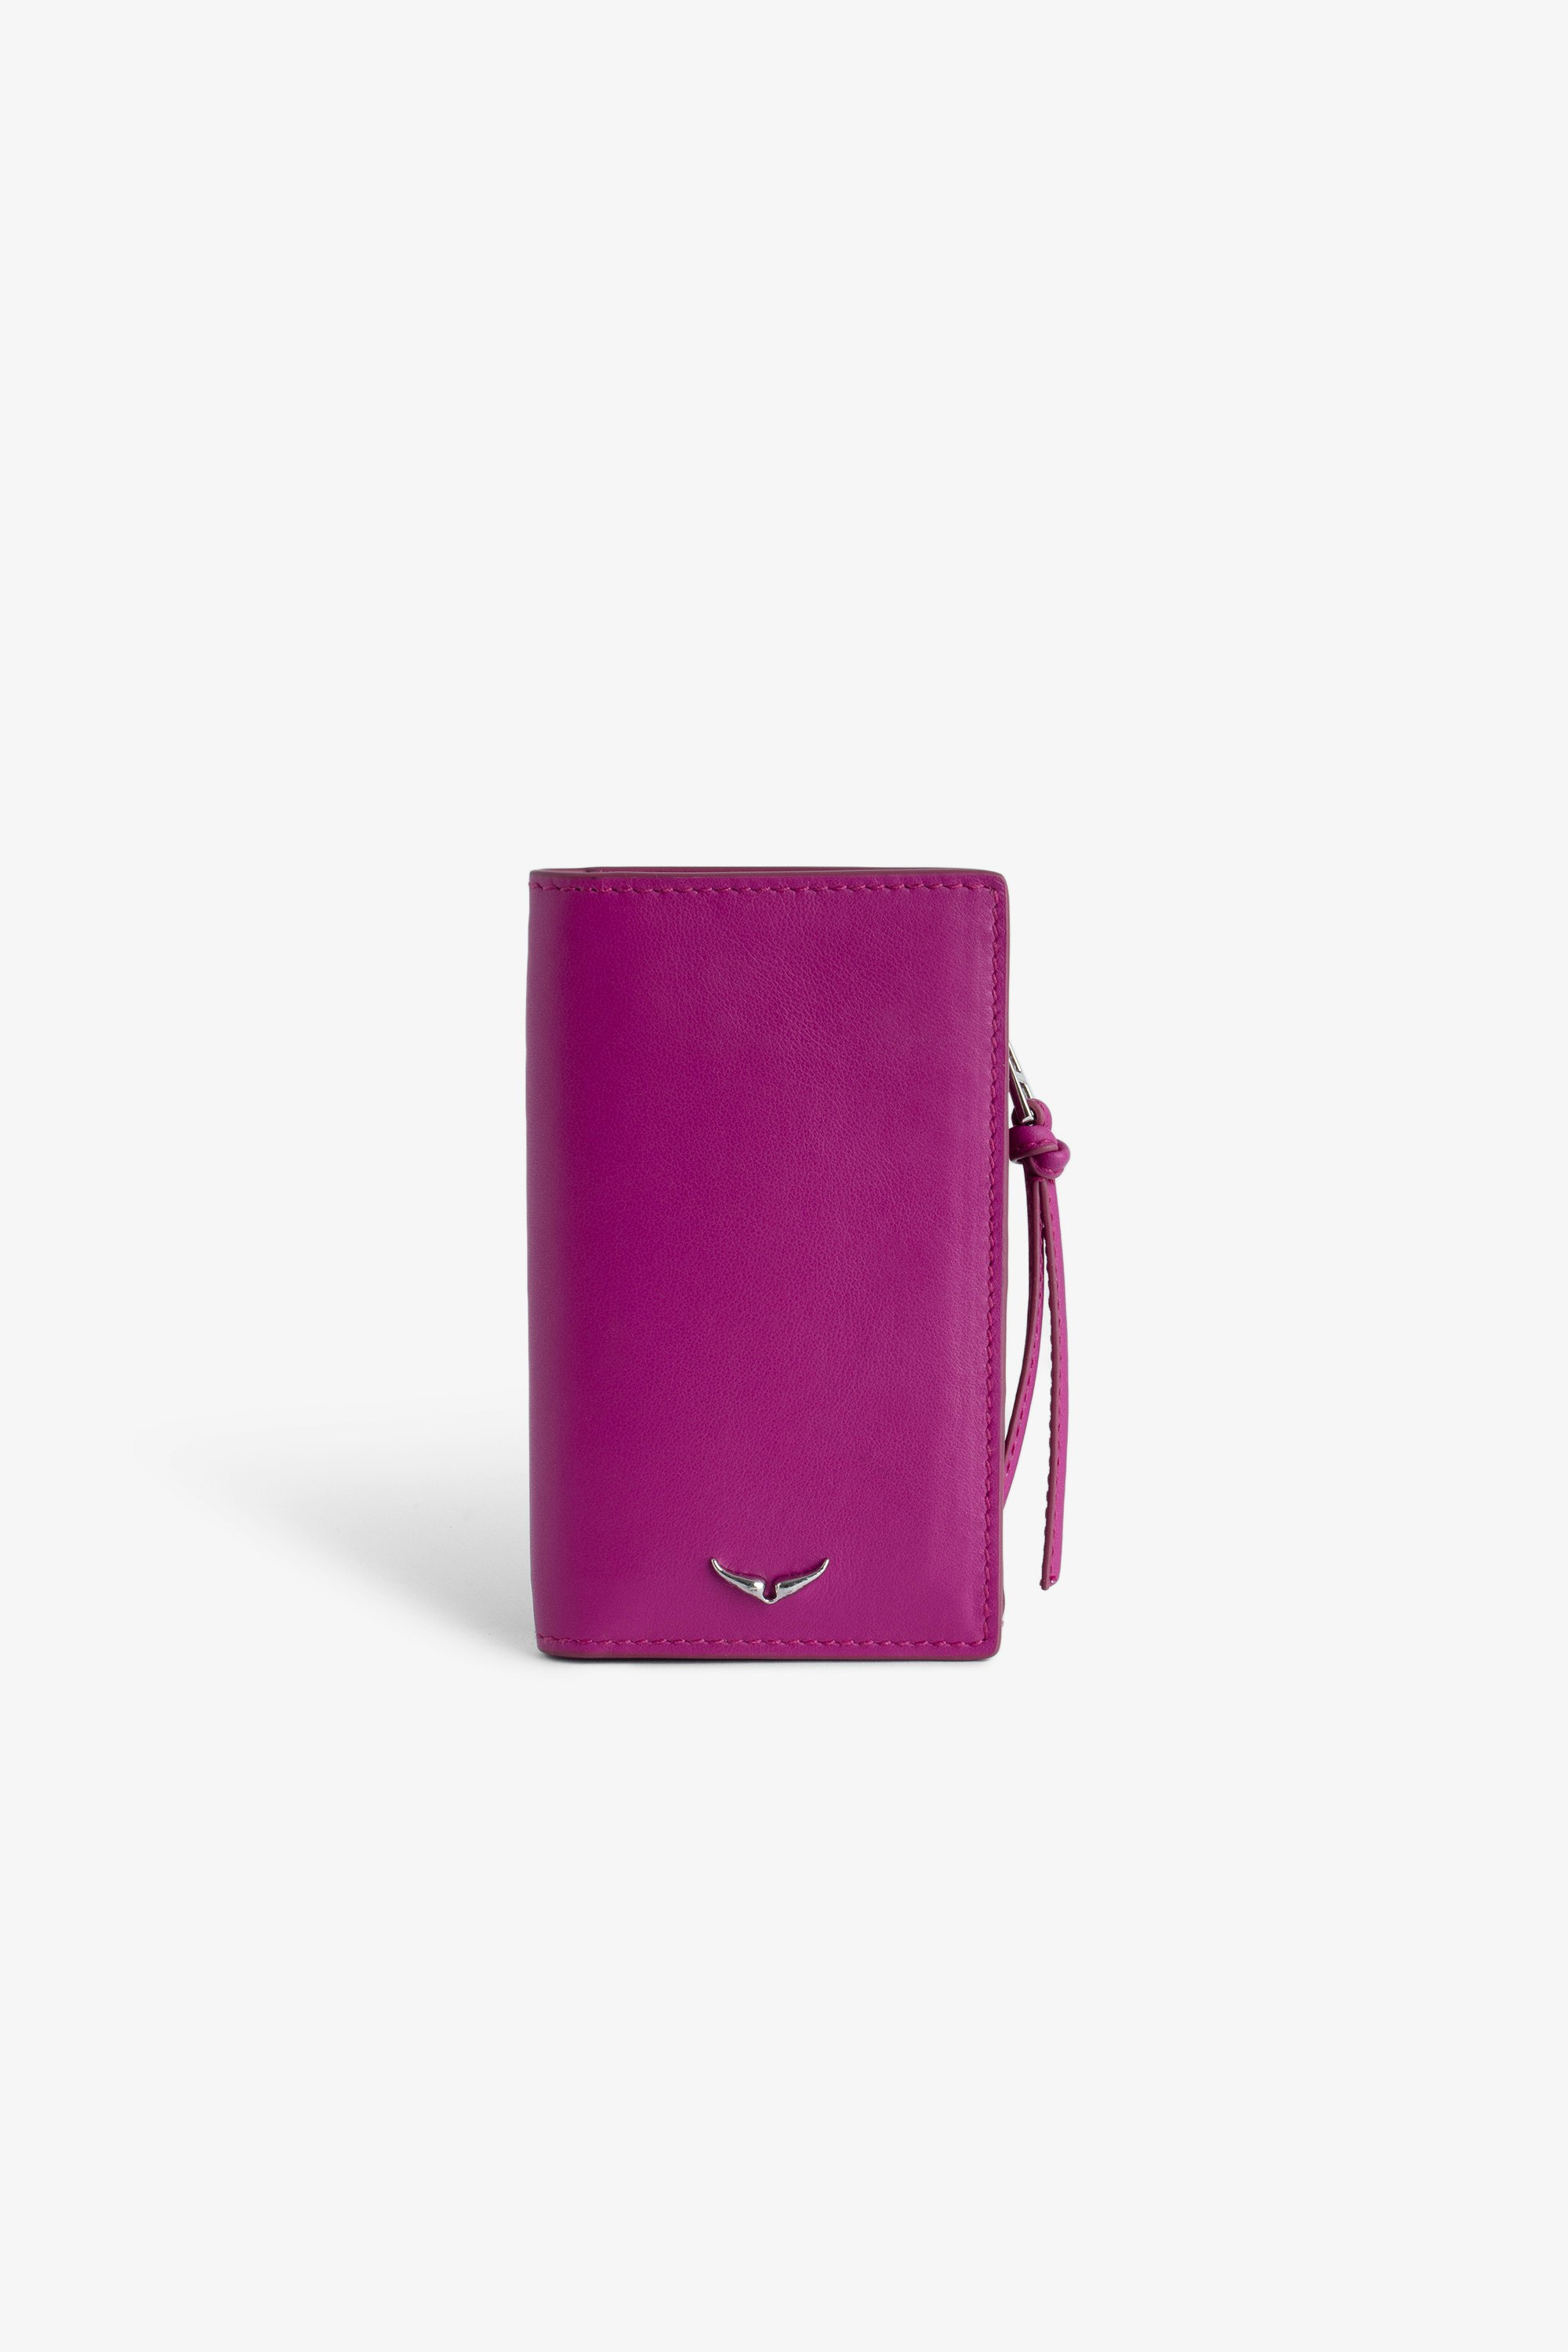 Compact Eternal Card Holder - Fuchsia smooth leather card holder with strap and wings charm.